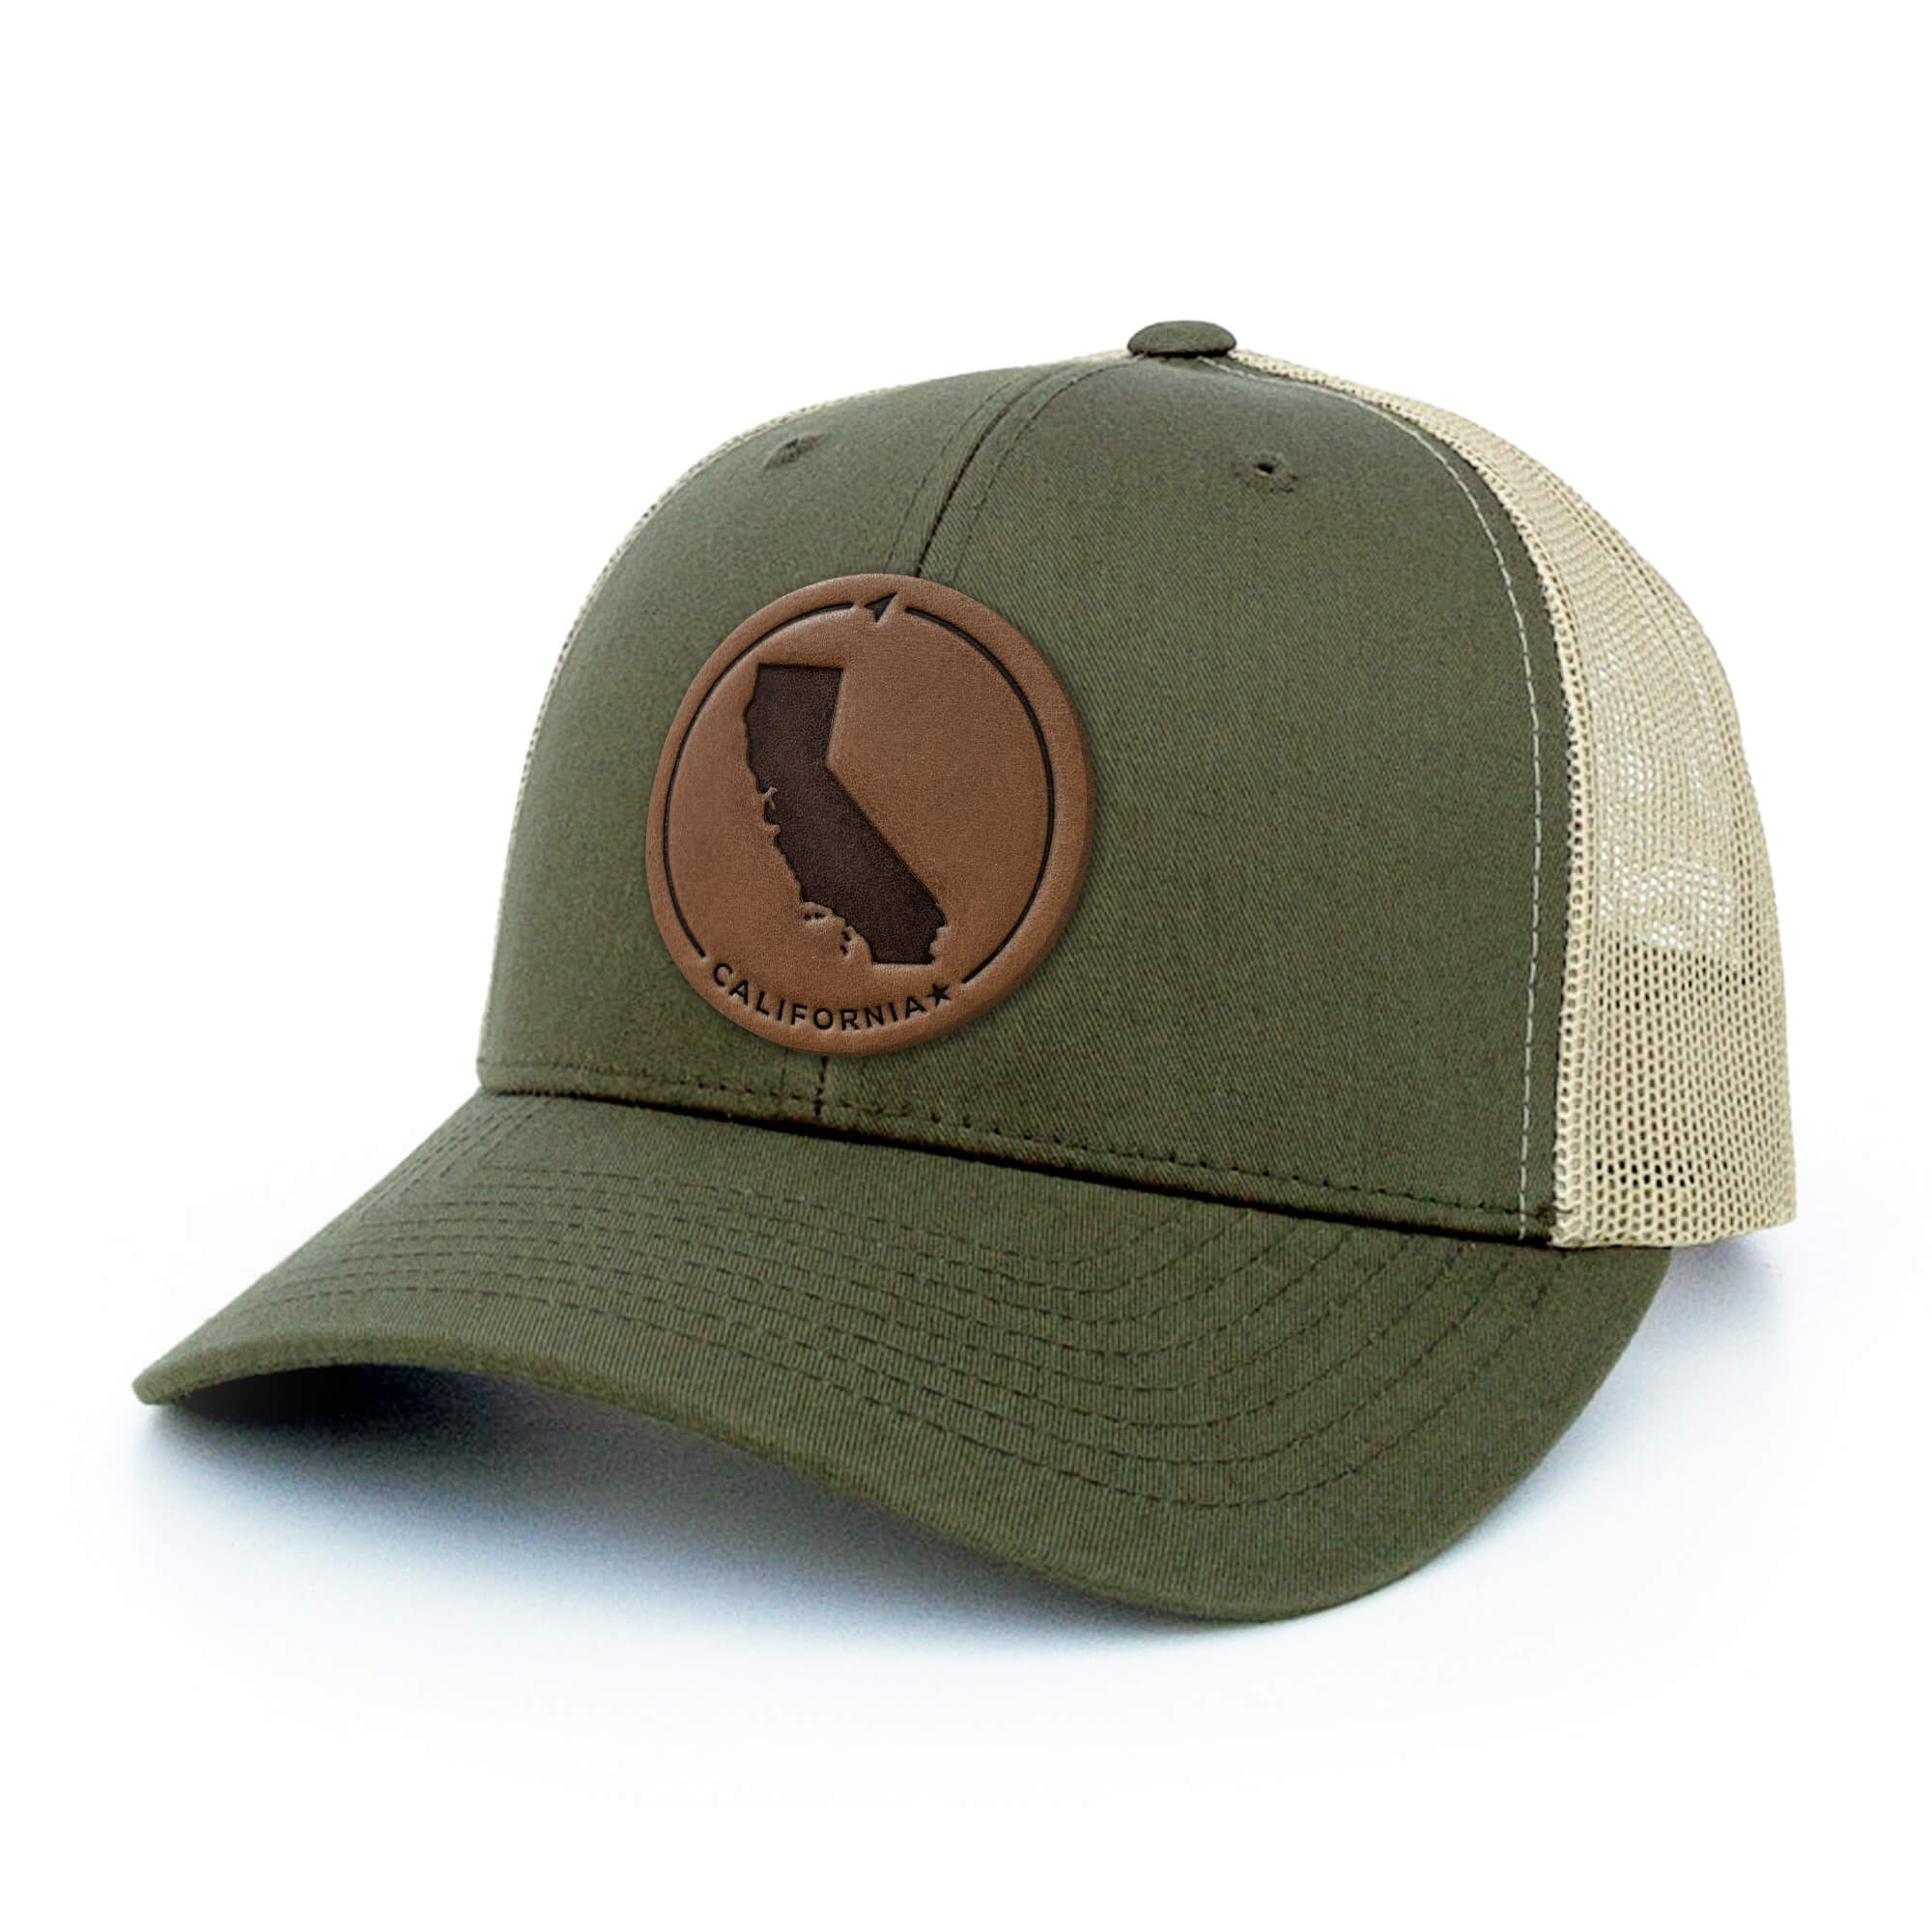 Moss Green and khaki trucker hat with full-grain leather patch of California | BLACK-003-011, CHARC-003-011, NAVY-003-011, HGREY-003-011, MOSS-003-011, BROWN-003-011